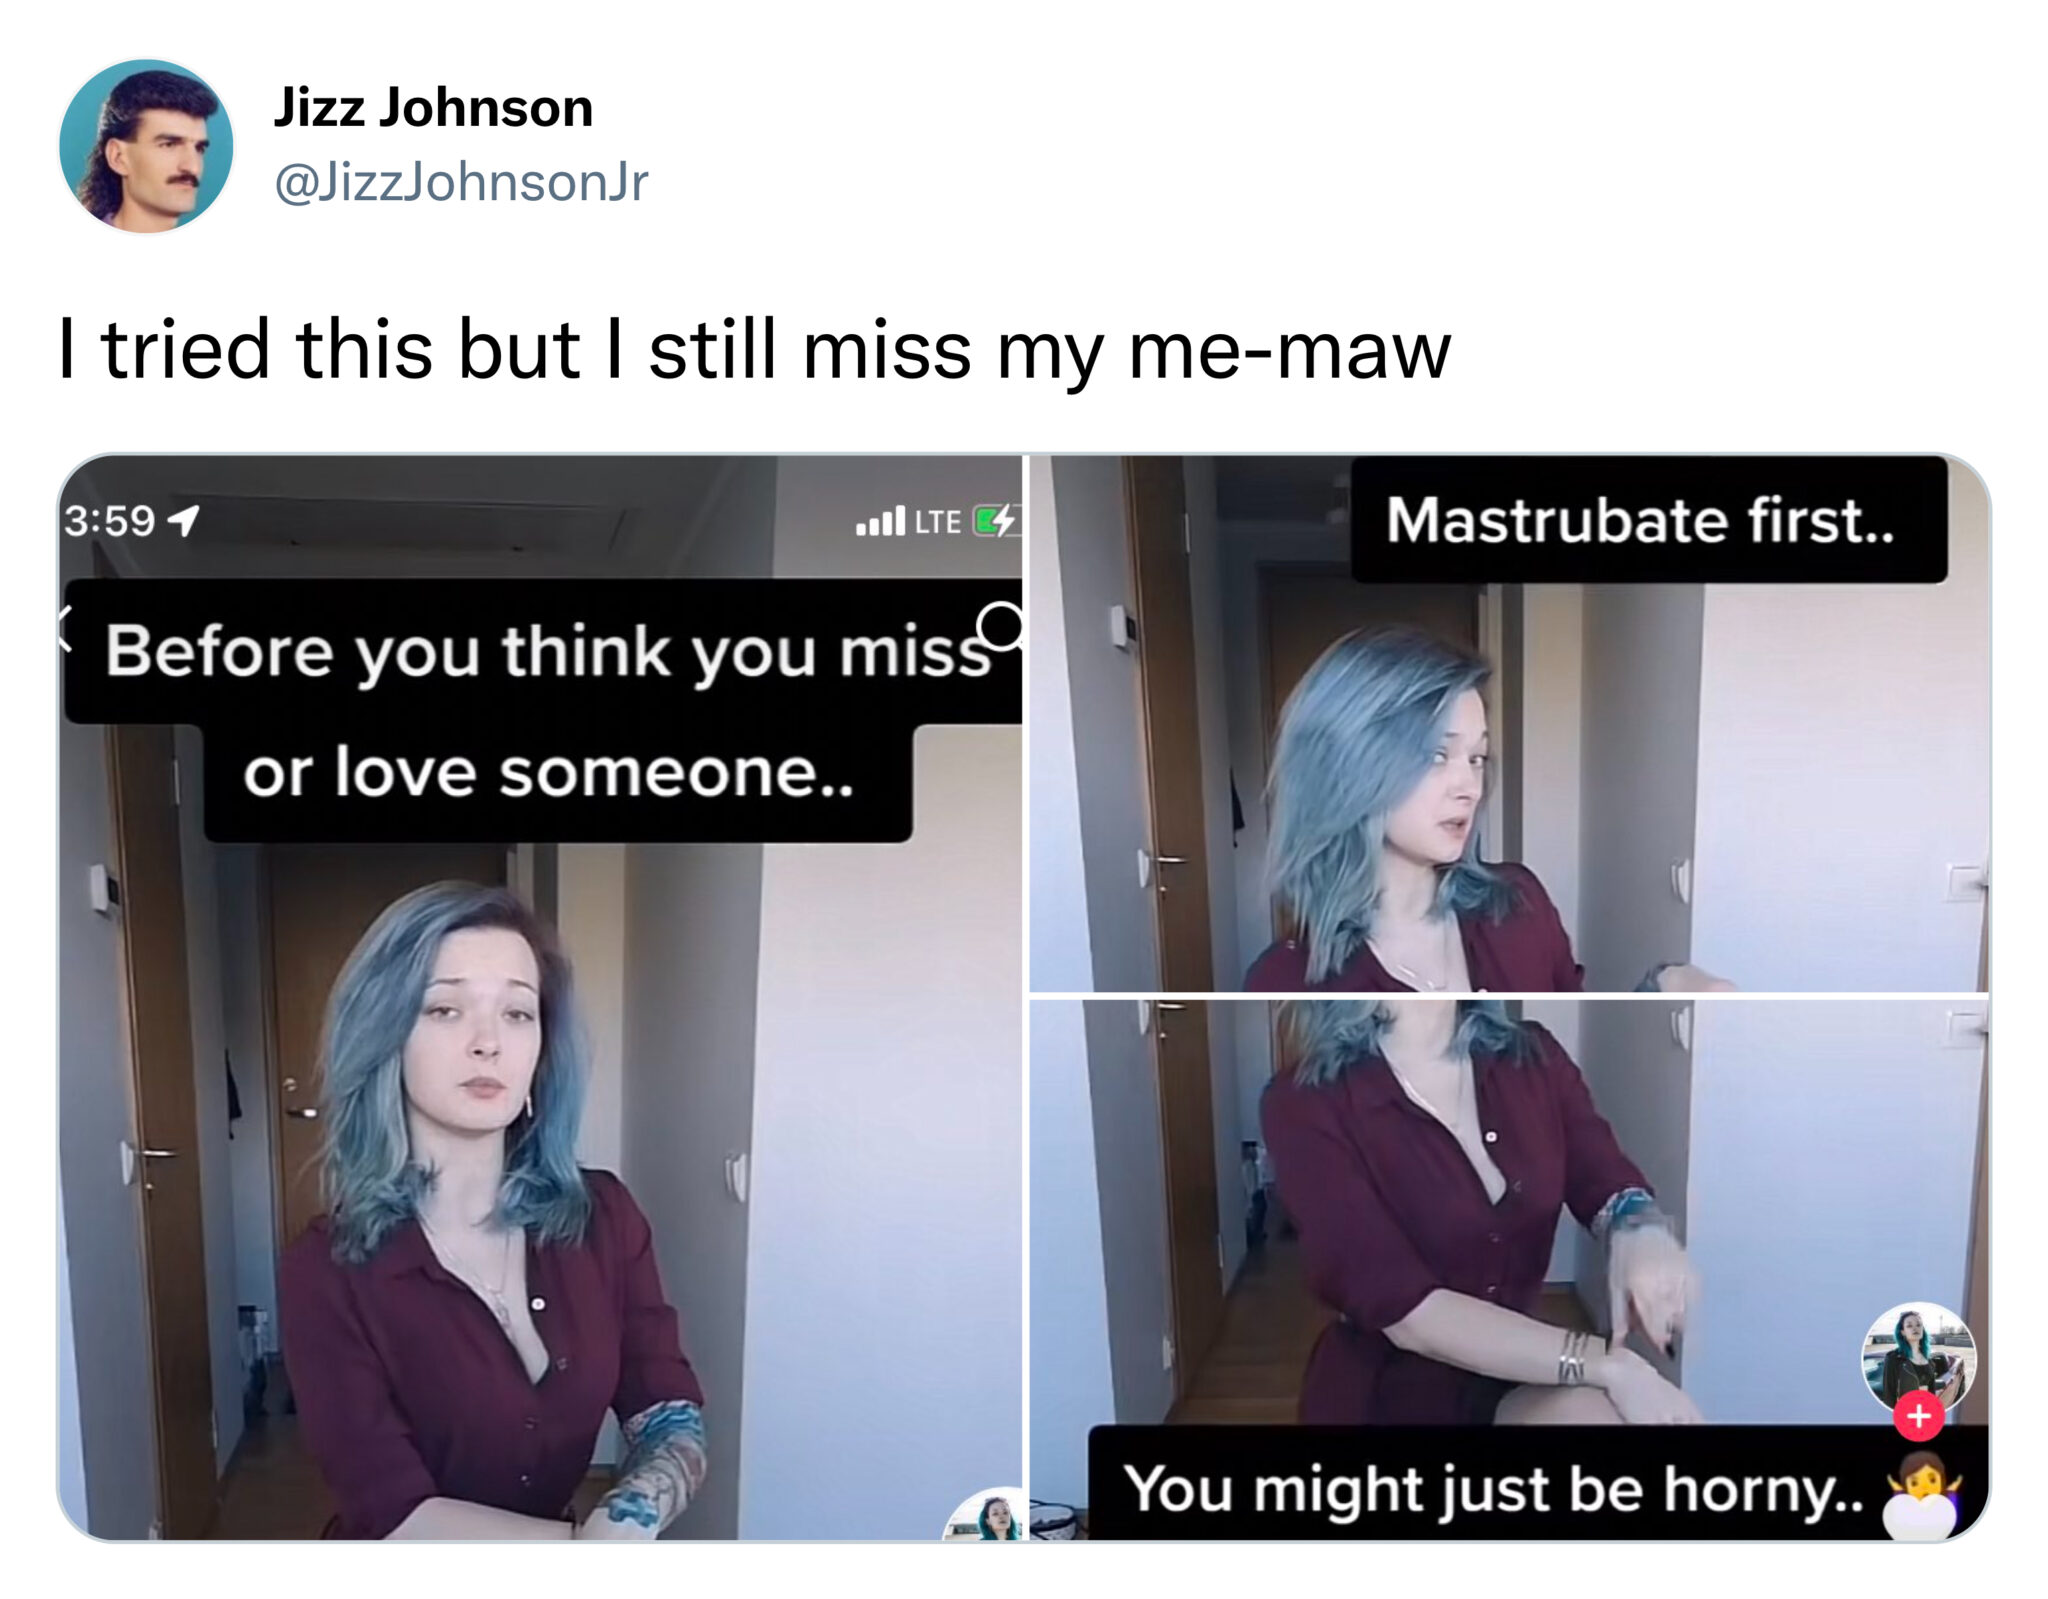 funny tweets  -  communication - Jizz Johnson I tried this but I still miss my memaw 1 Lte Before you think you miss or love someone.. Mastrubate first.. You might just be horny..